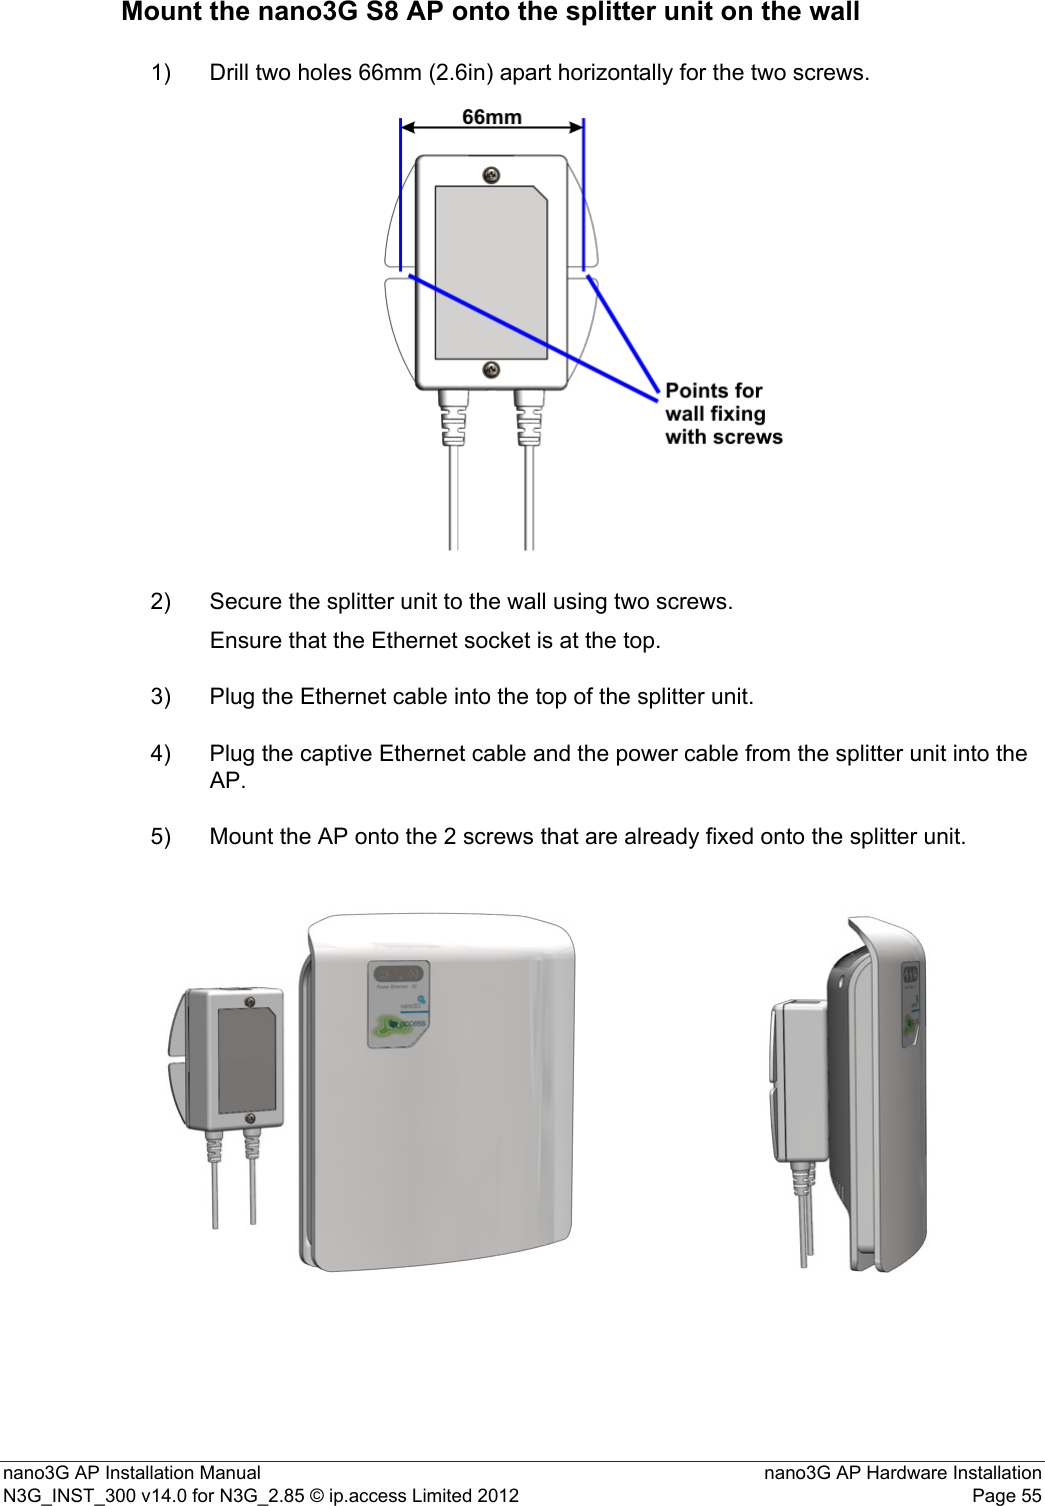 nano3G AP Installation Manual nano3G AP Hardware InstallationN3G_INST_300 v14.0 for N3G_2.85 © ip.access Limited 2012 Page 55Mount the nano3G S8 AP onto the splitter unit on the wall1) Drill two holes 66mm (2.6in) apart horizontally for the two screws.2) Secure the splitter unit to the wall using two screws.Ensure that the Ethernet socket is at the top.3) Plug the Ethernet cable into the top of the splitter unit.4) Plug the captive Ethernet cable and the power cable from the splitter unit into the AP.5) Mount the AP onto the 2 screws that are already fixed onto the splitter unit.